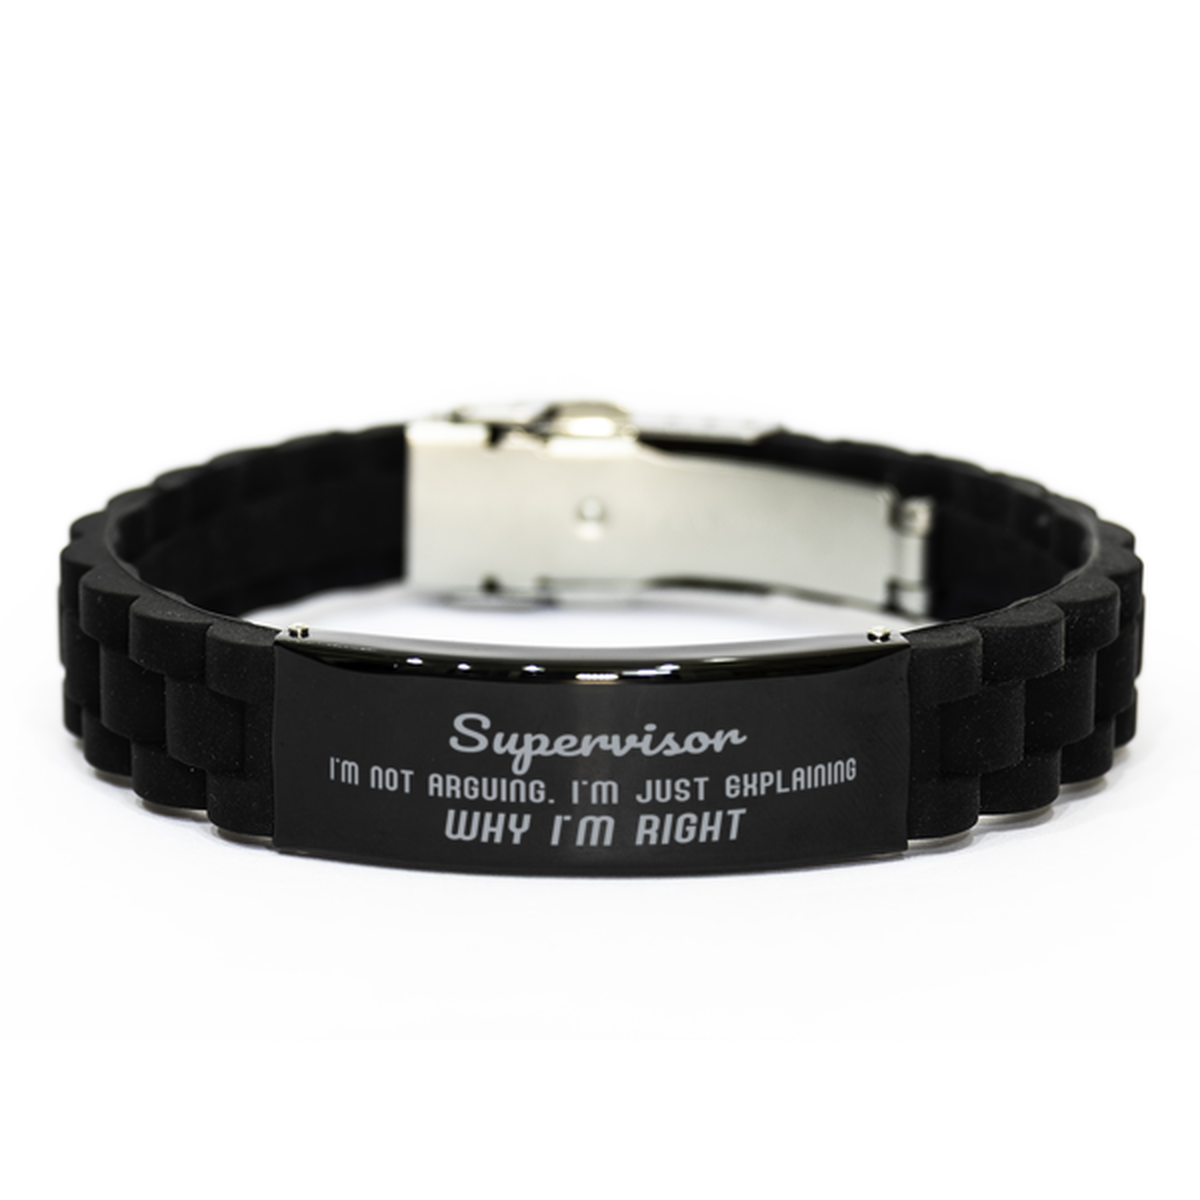 Supervisor I'm not Arguing. I'm Just Explaining Why I'm RIGHT Black Glidelock Clasp Bracelet, Funny Saying Quote Supervisor Gifts For Supervisor Graduation Birthday Christmas Gifts for Men Women Coworker